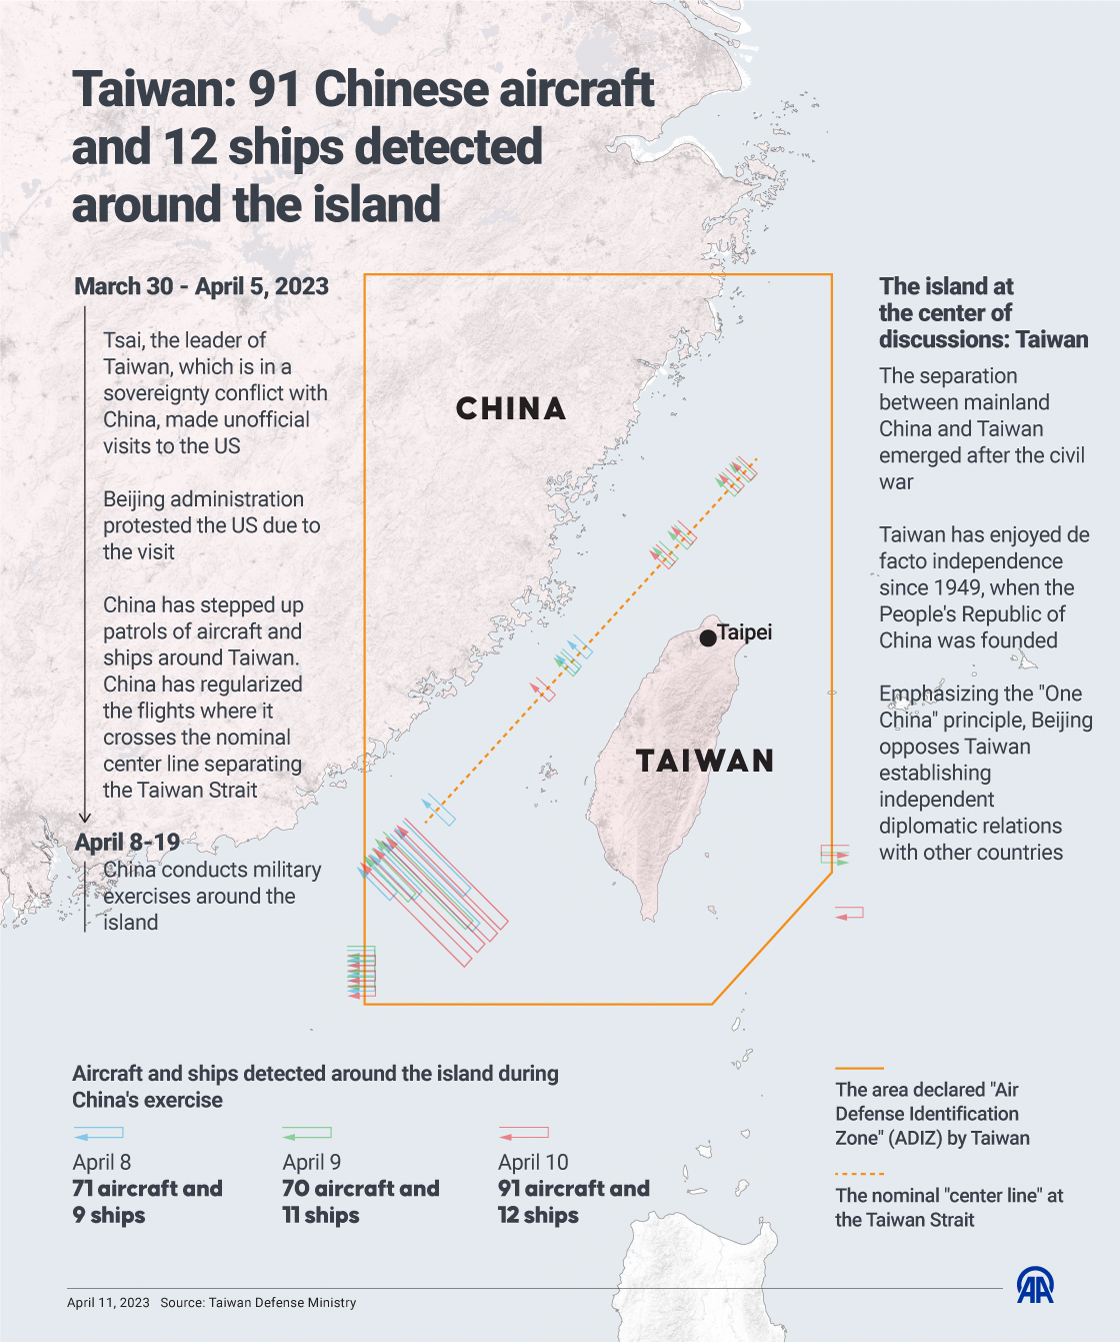 Taiwan: 91 Chinese aircraft and 12 ships detected around the island